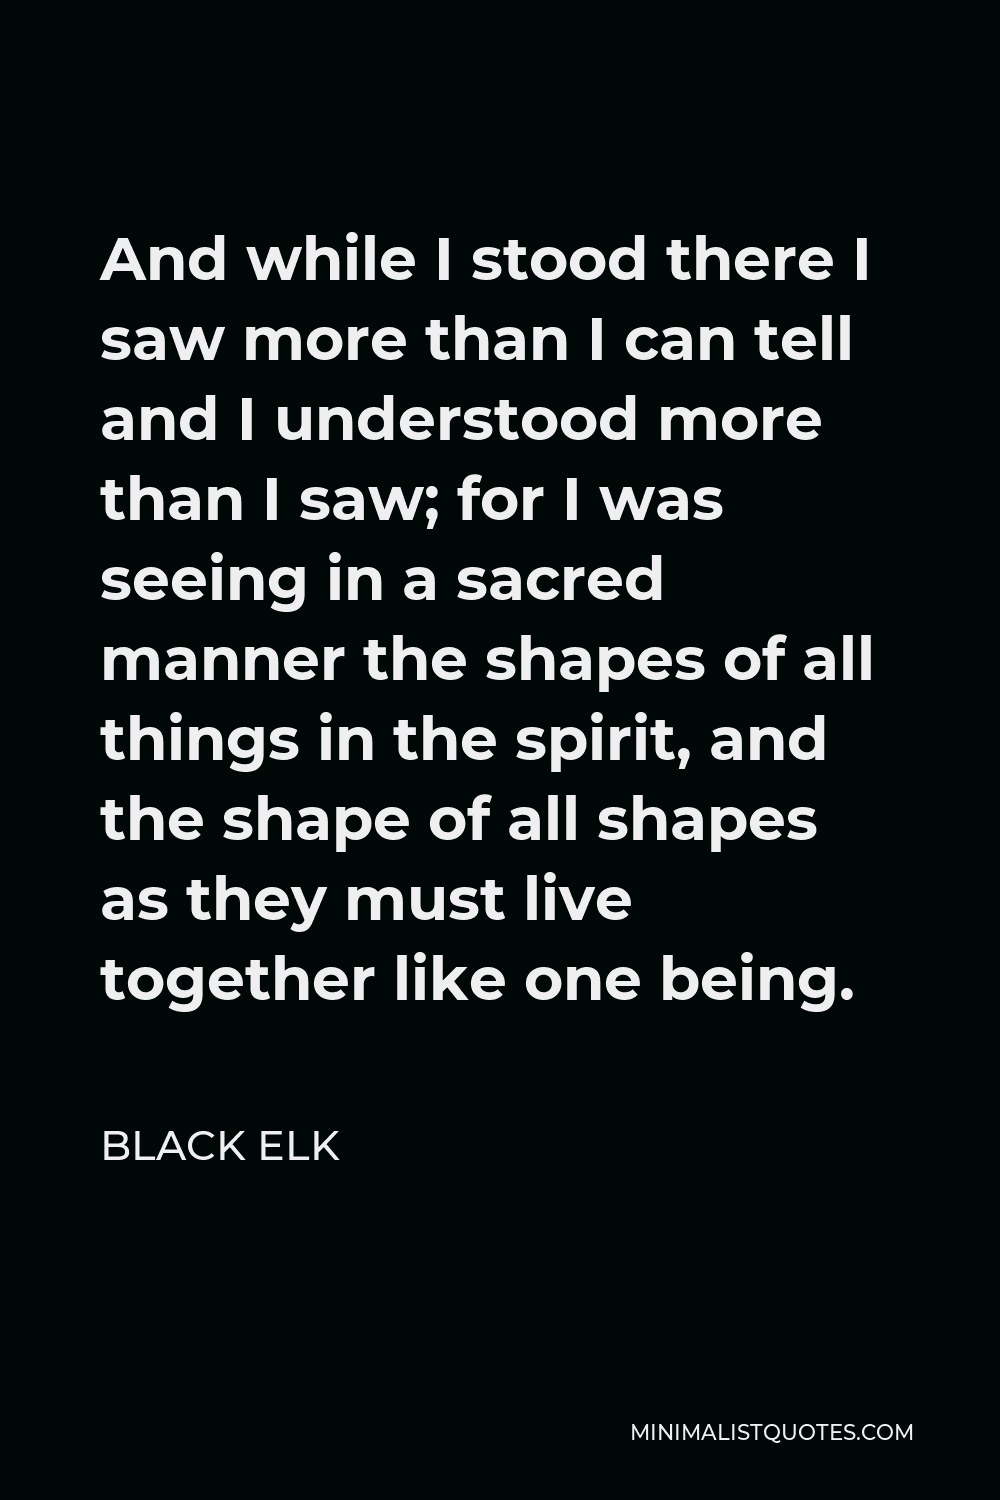 Black Elk Quote - And while I stood there I saw more than I can tell and I understood more than I saw; for I was seeing in a sacred manner the shapes of all things in the spirit, and the shape of all shapes as they must live together like one being.